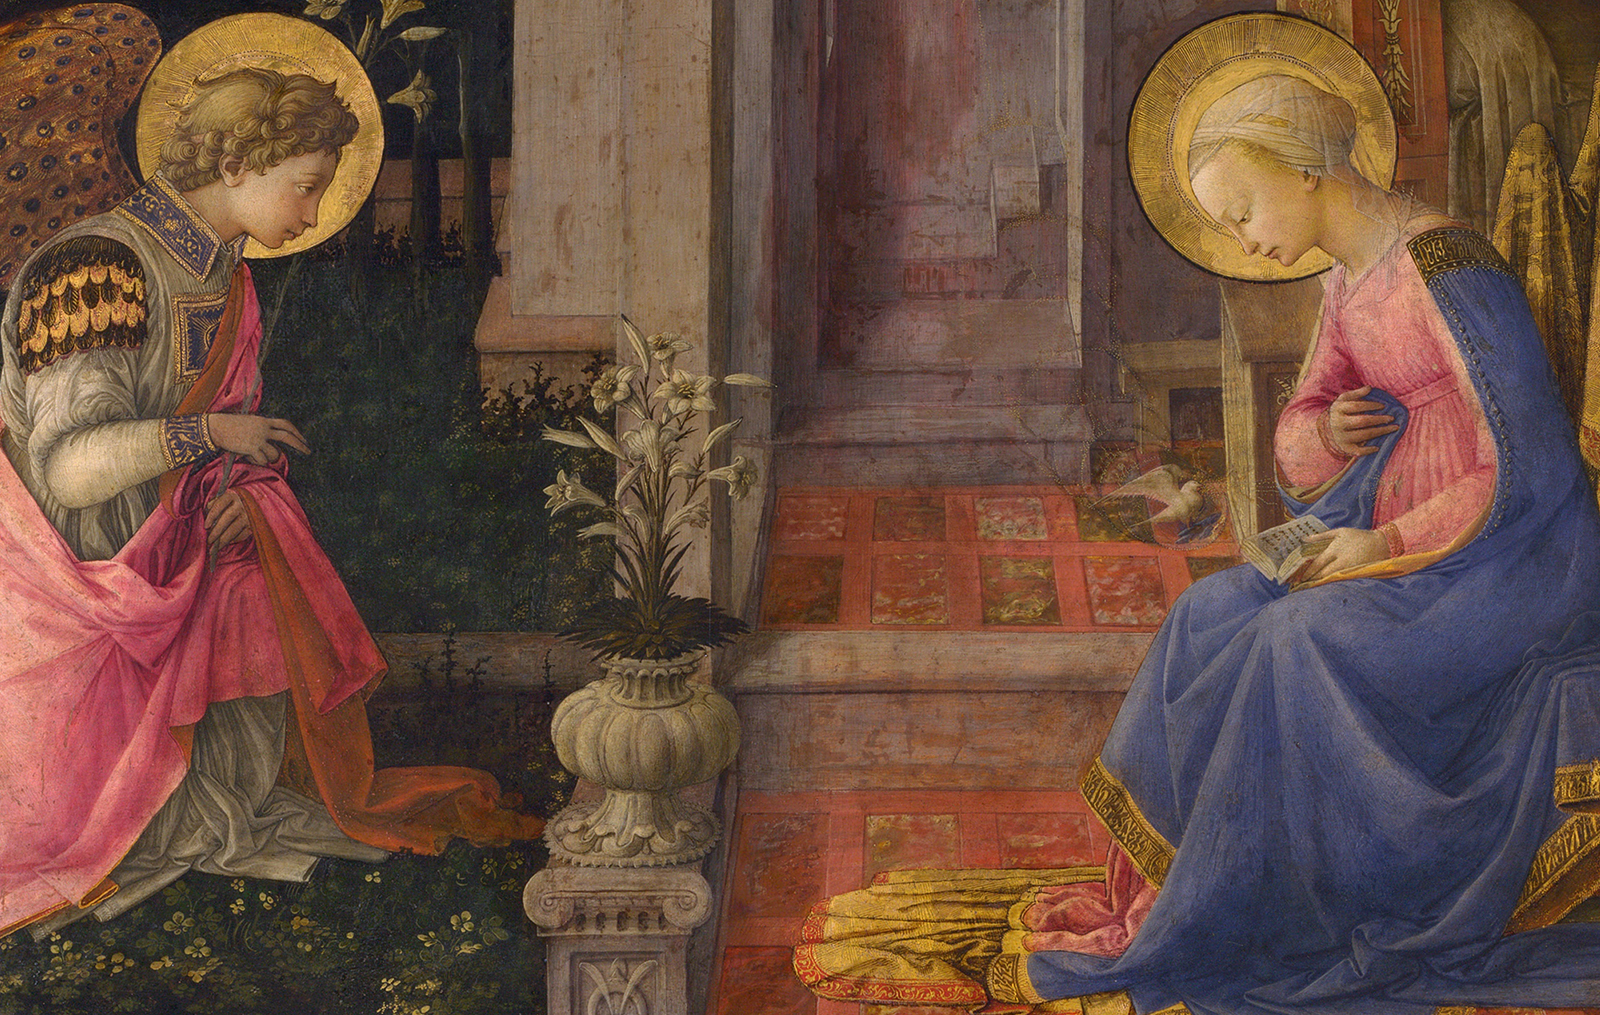 The Annunciation of The Lord Mary's Fiat, her yes to God. Magnificat